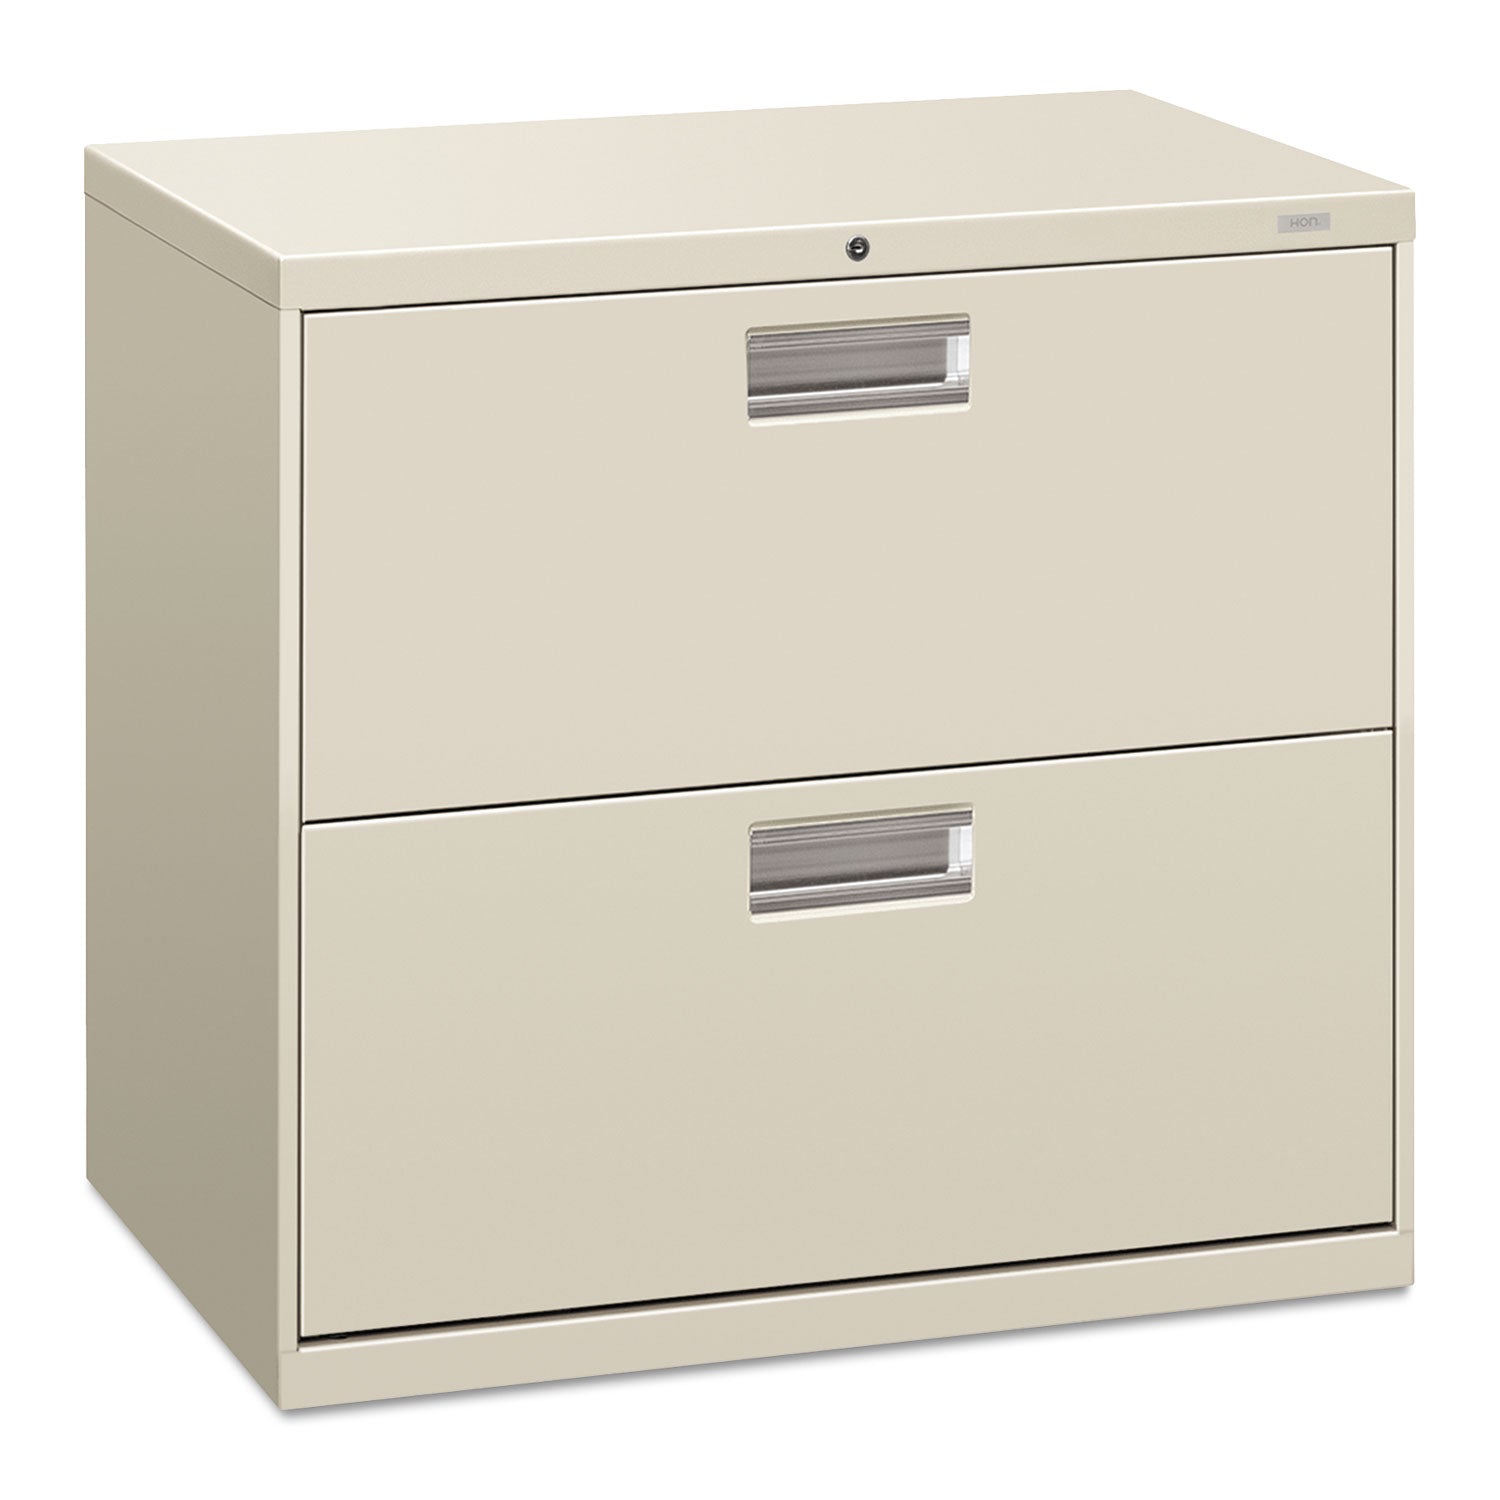 Brigade 600 Series Lateral File, 2 Legal/Letter-Size File Drawers, Light Gray, 30" x 18" x 28 - 